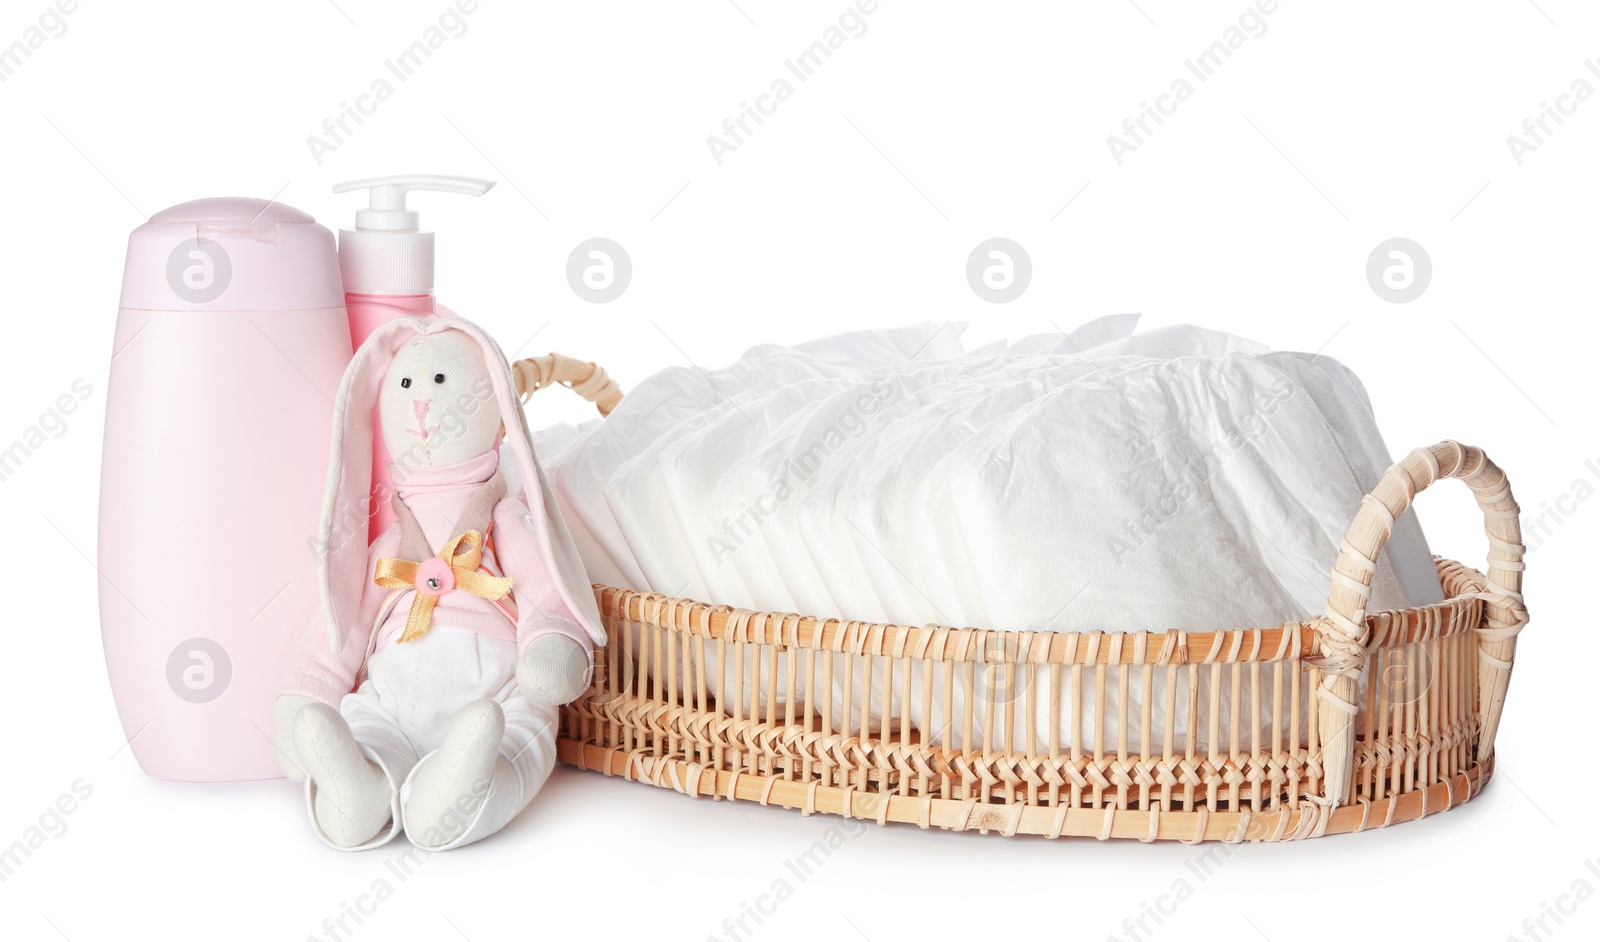 Photo of Wicker tray with disposable diapers, toy bunny and toiletries on white background